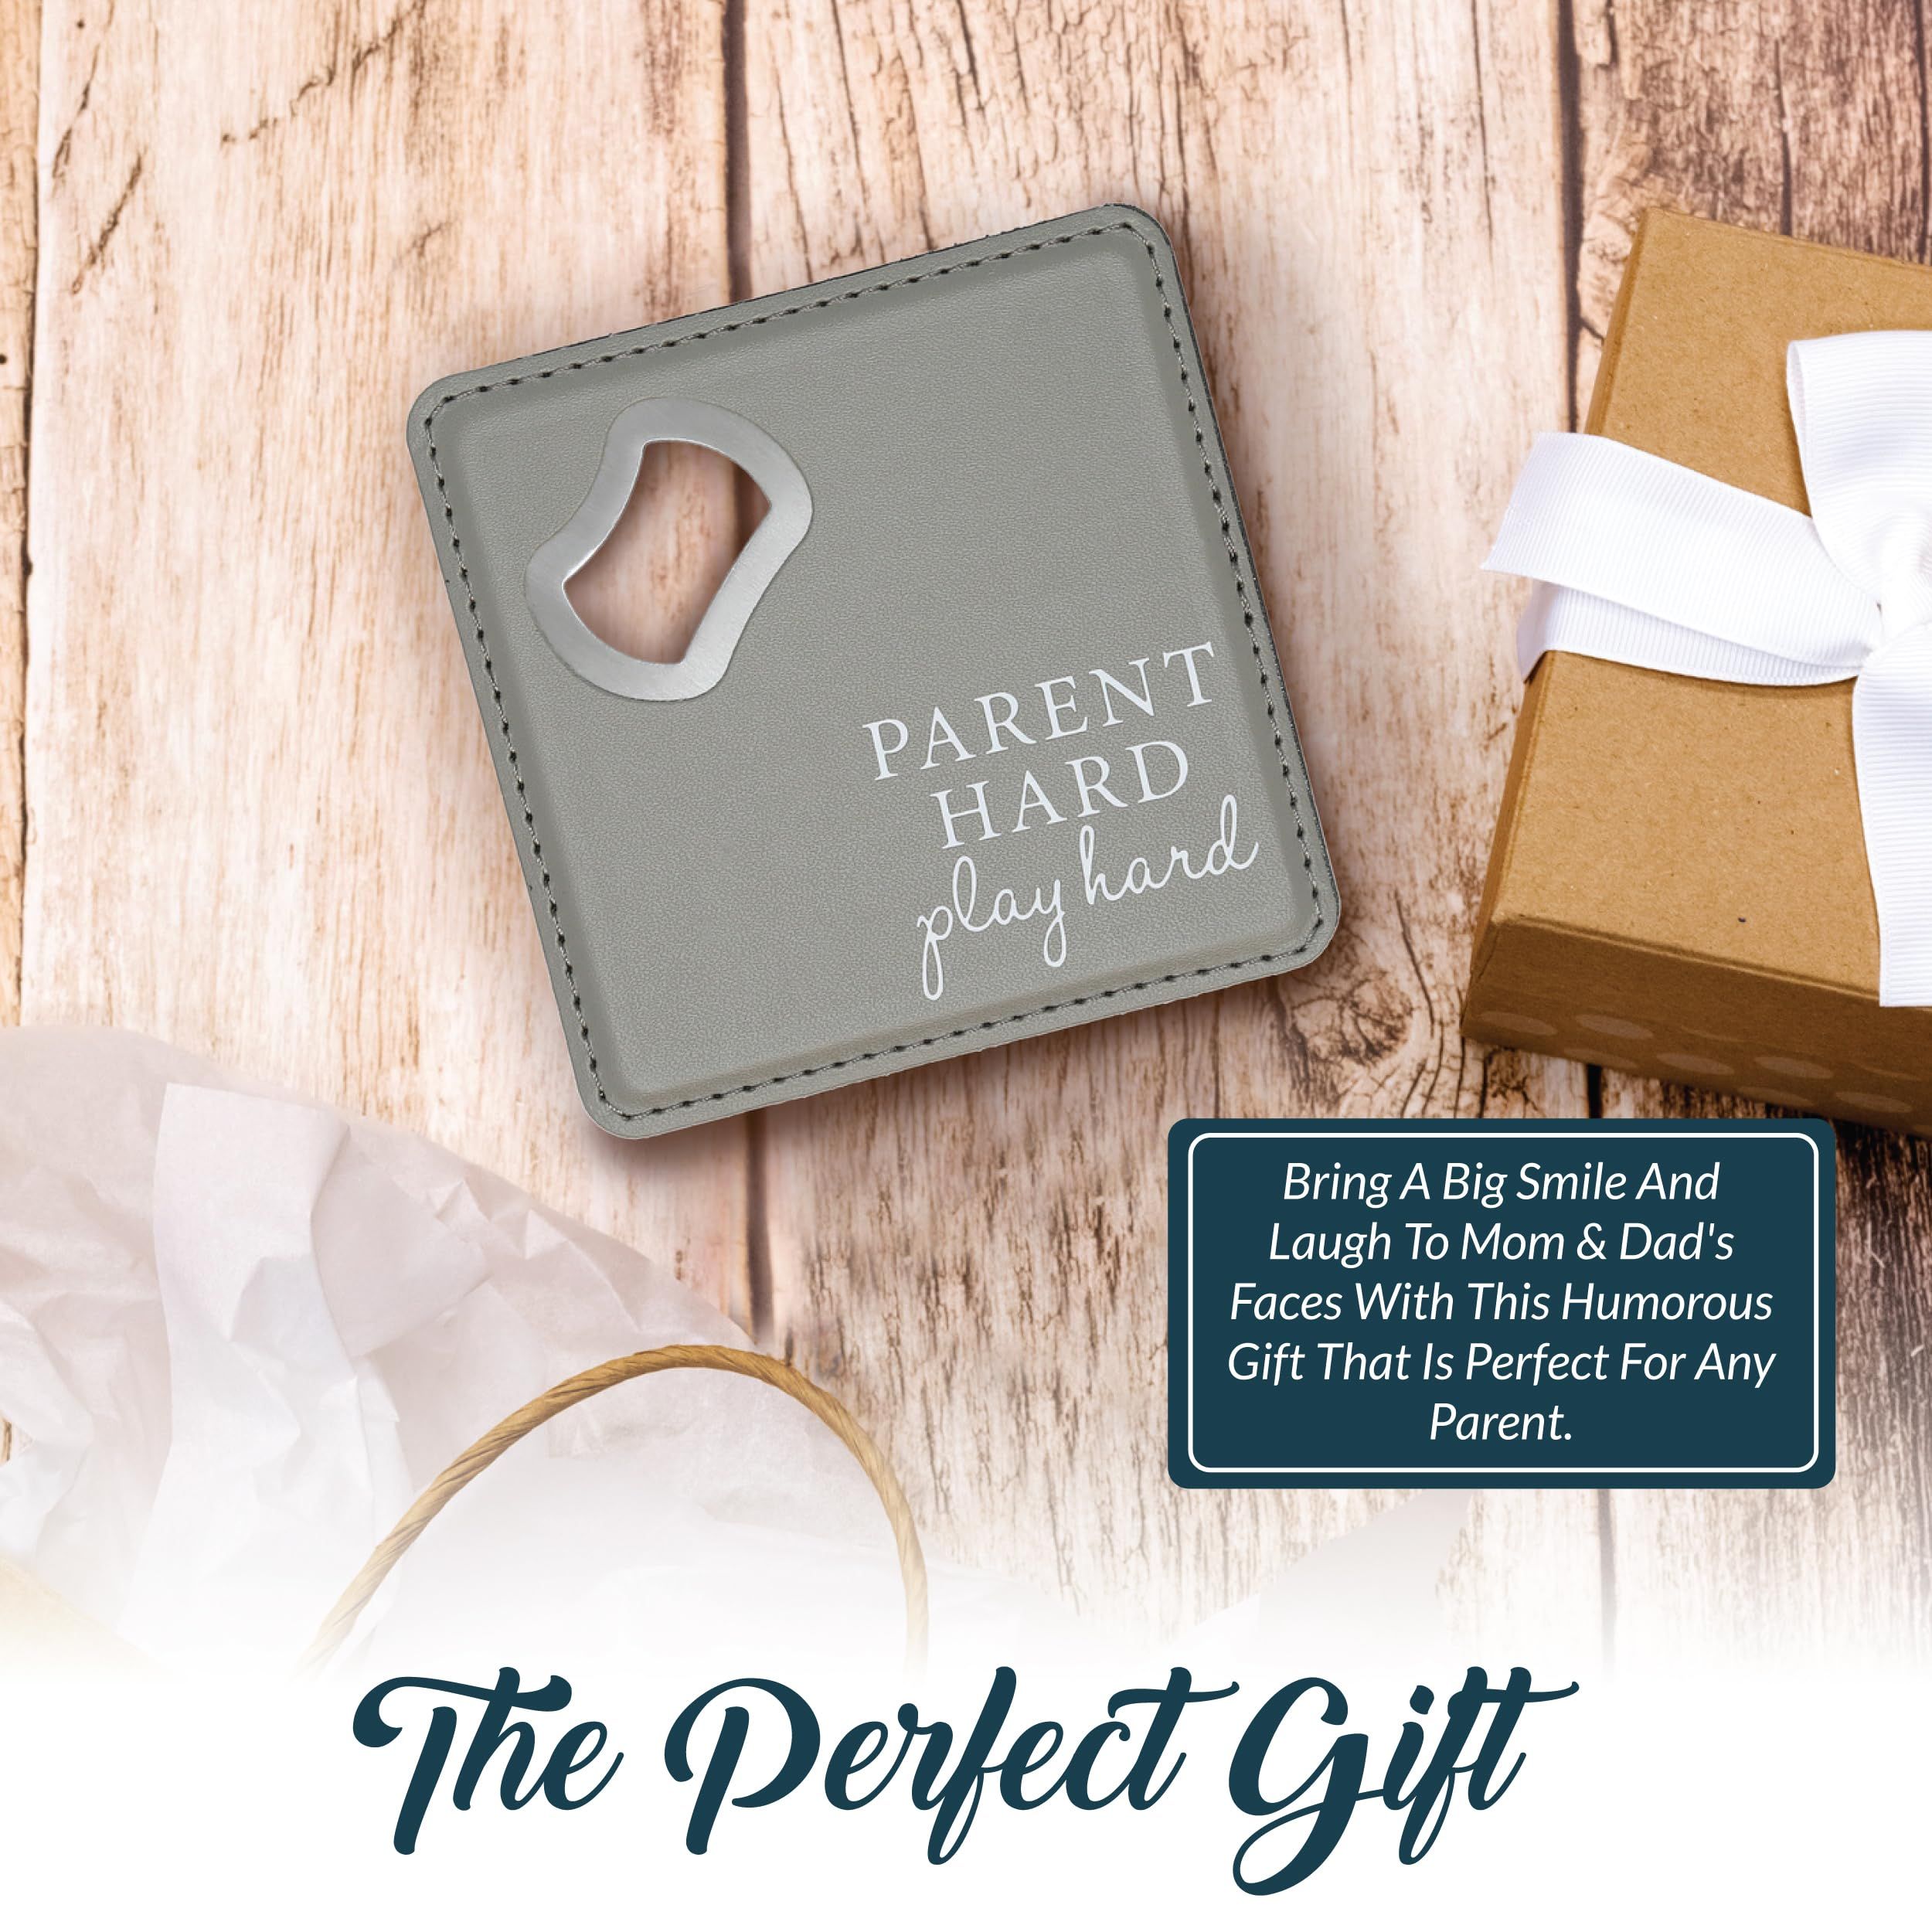 The Best Gift You Can Give Your Parents - FamilyLife®